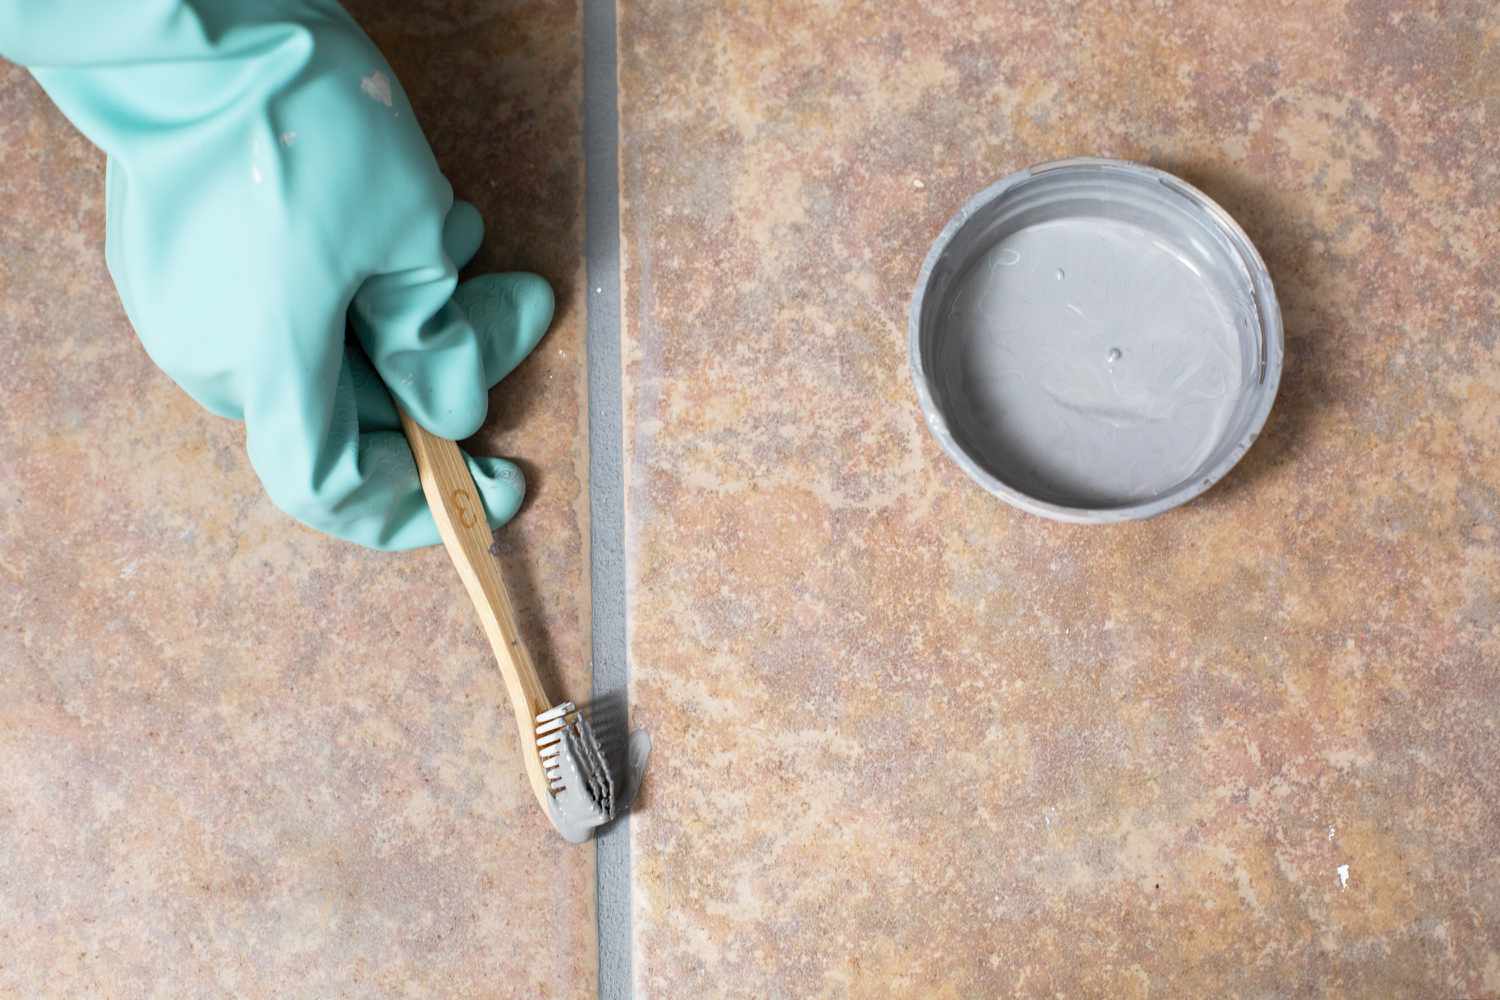 Changing grout color to gray with old toothbrush and green gloves over tiles floor